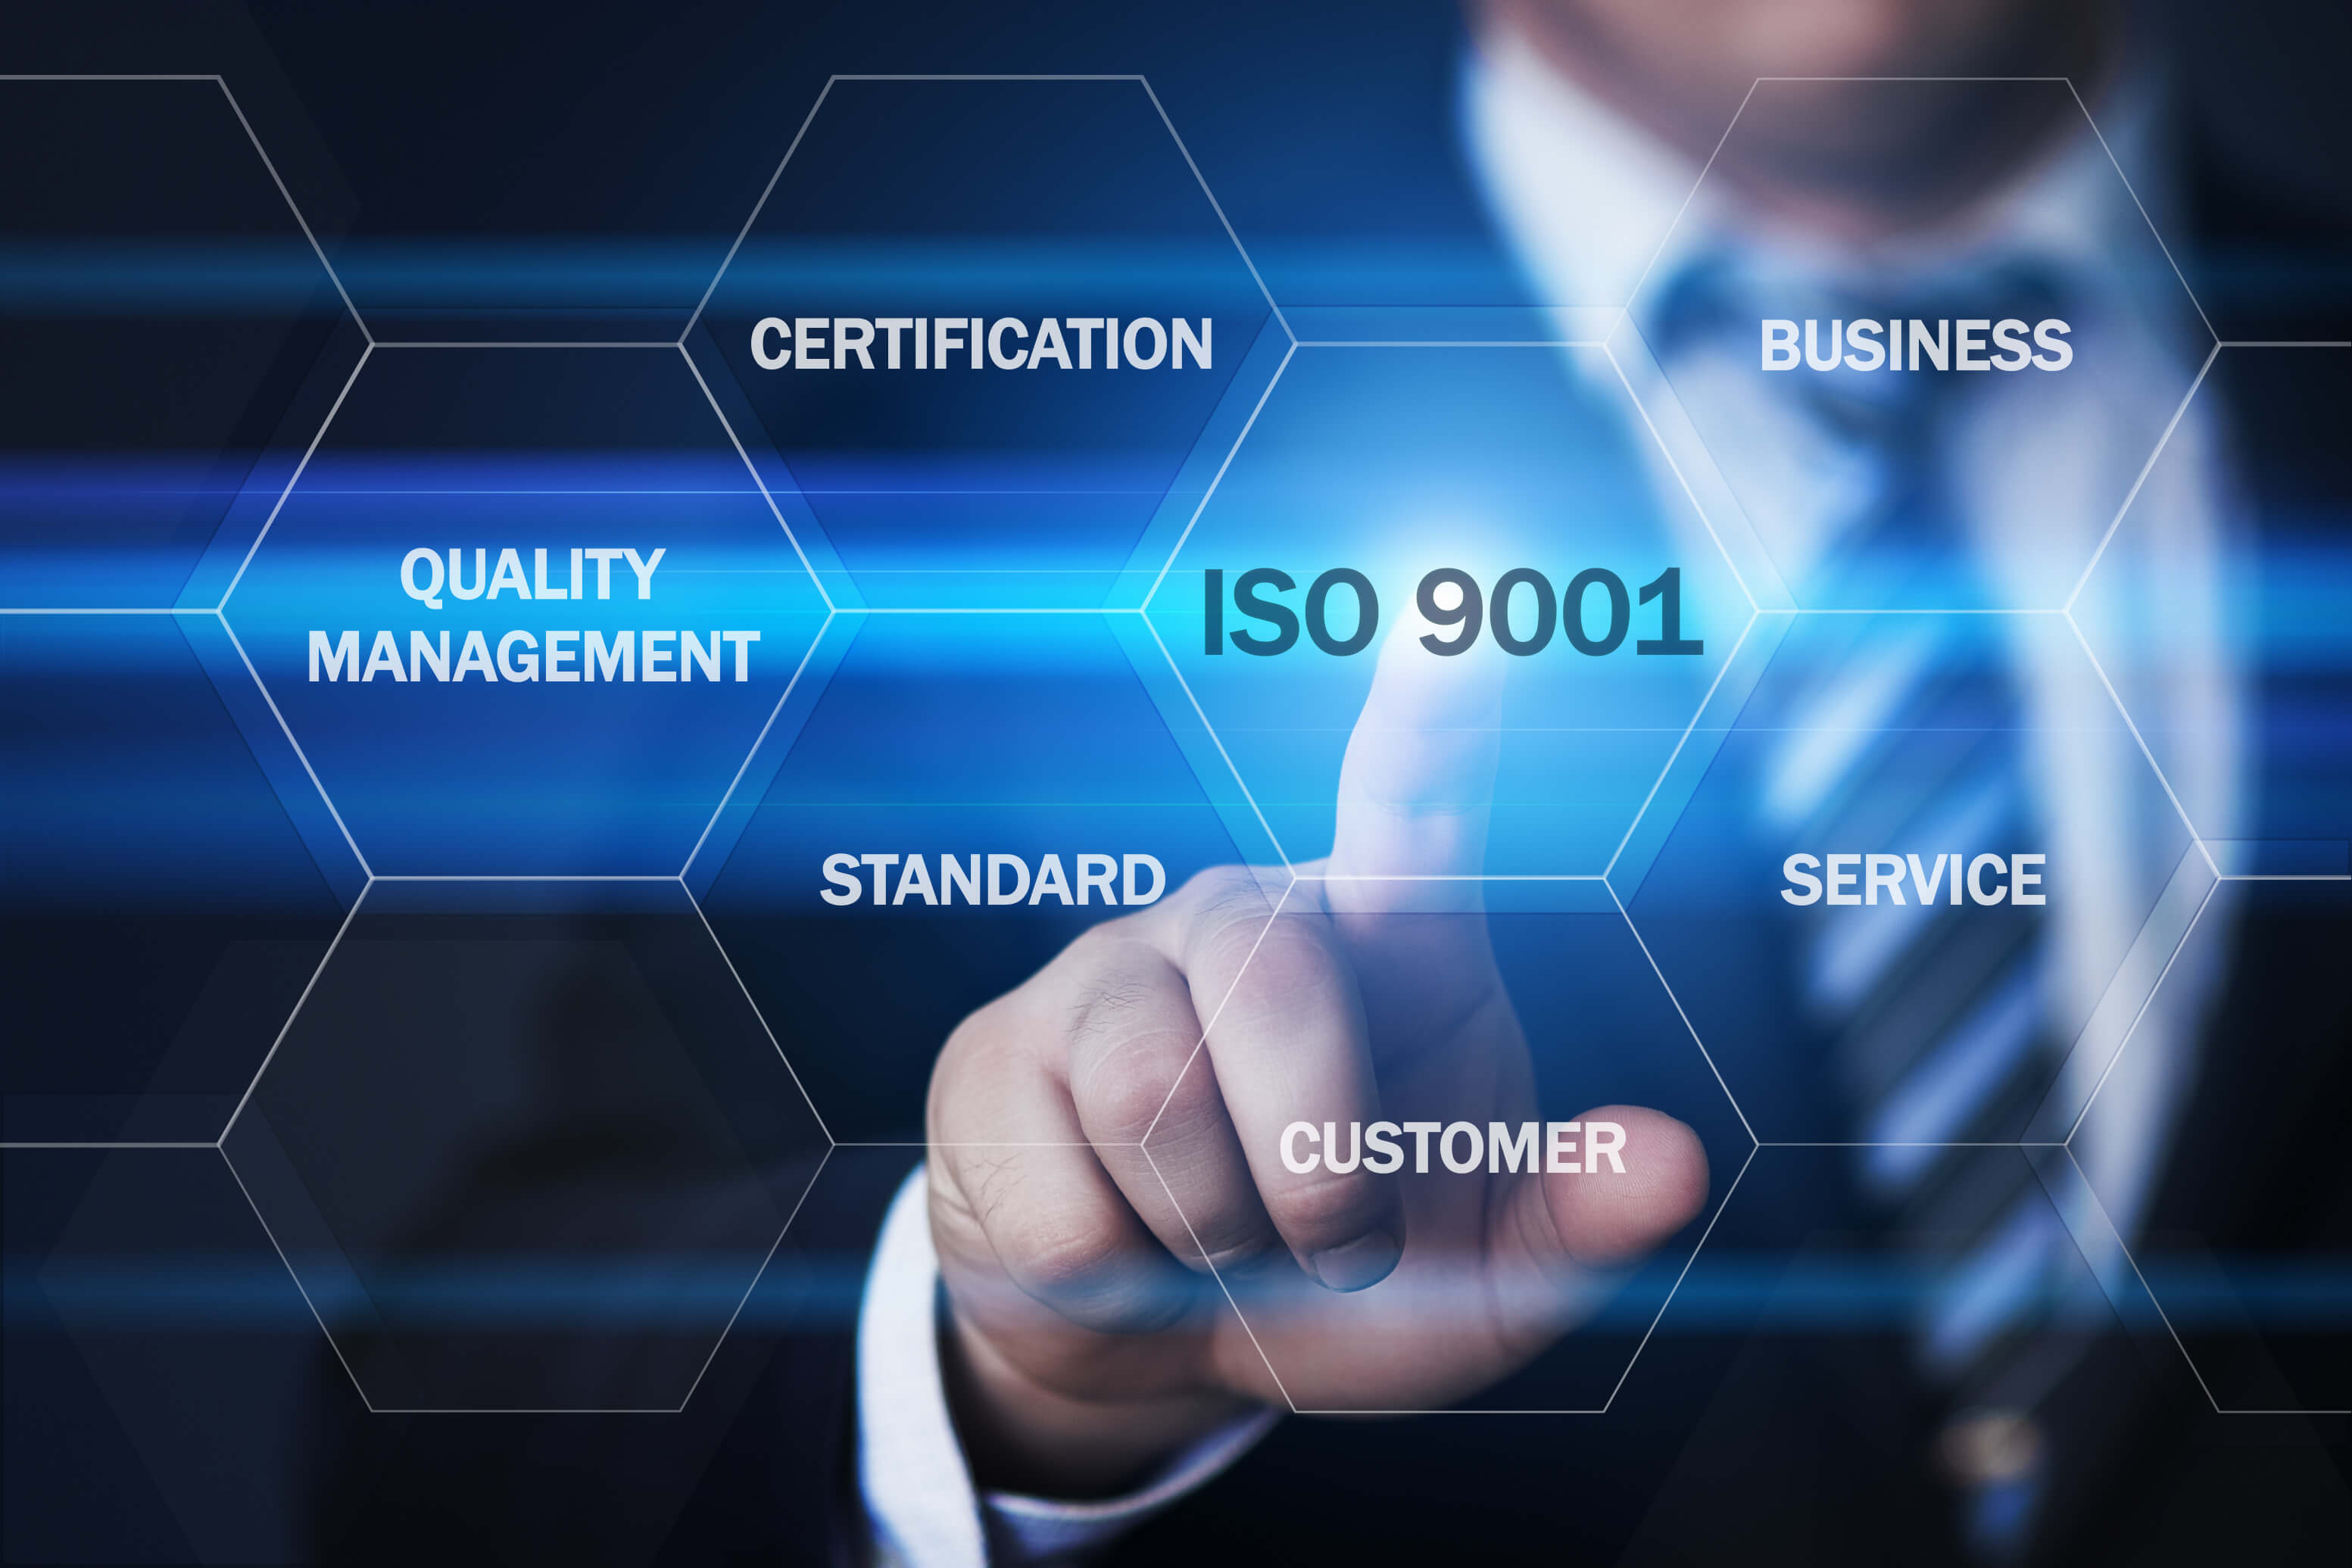 Man pointing to ISO 9001